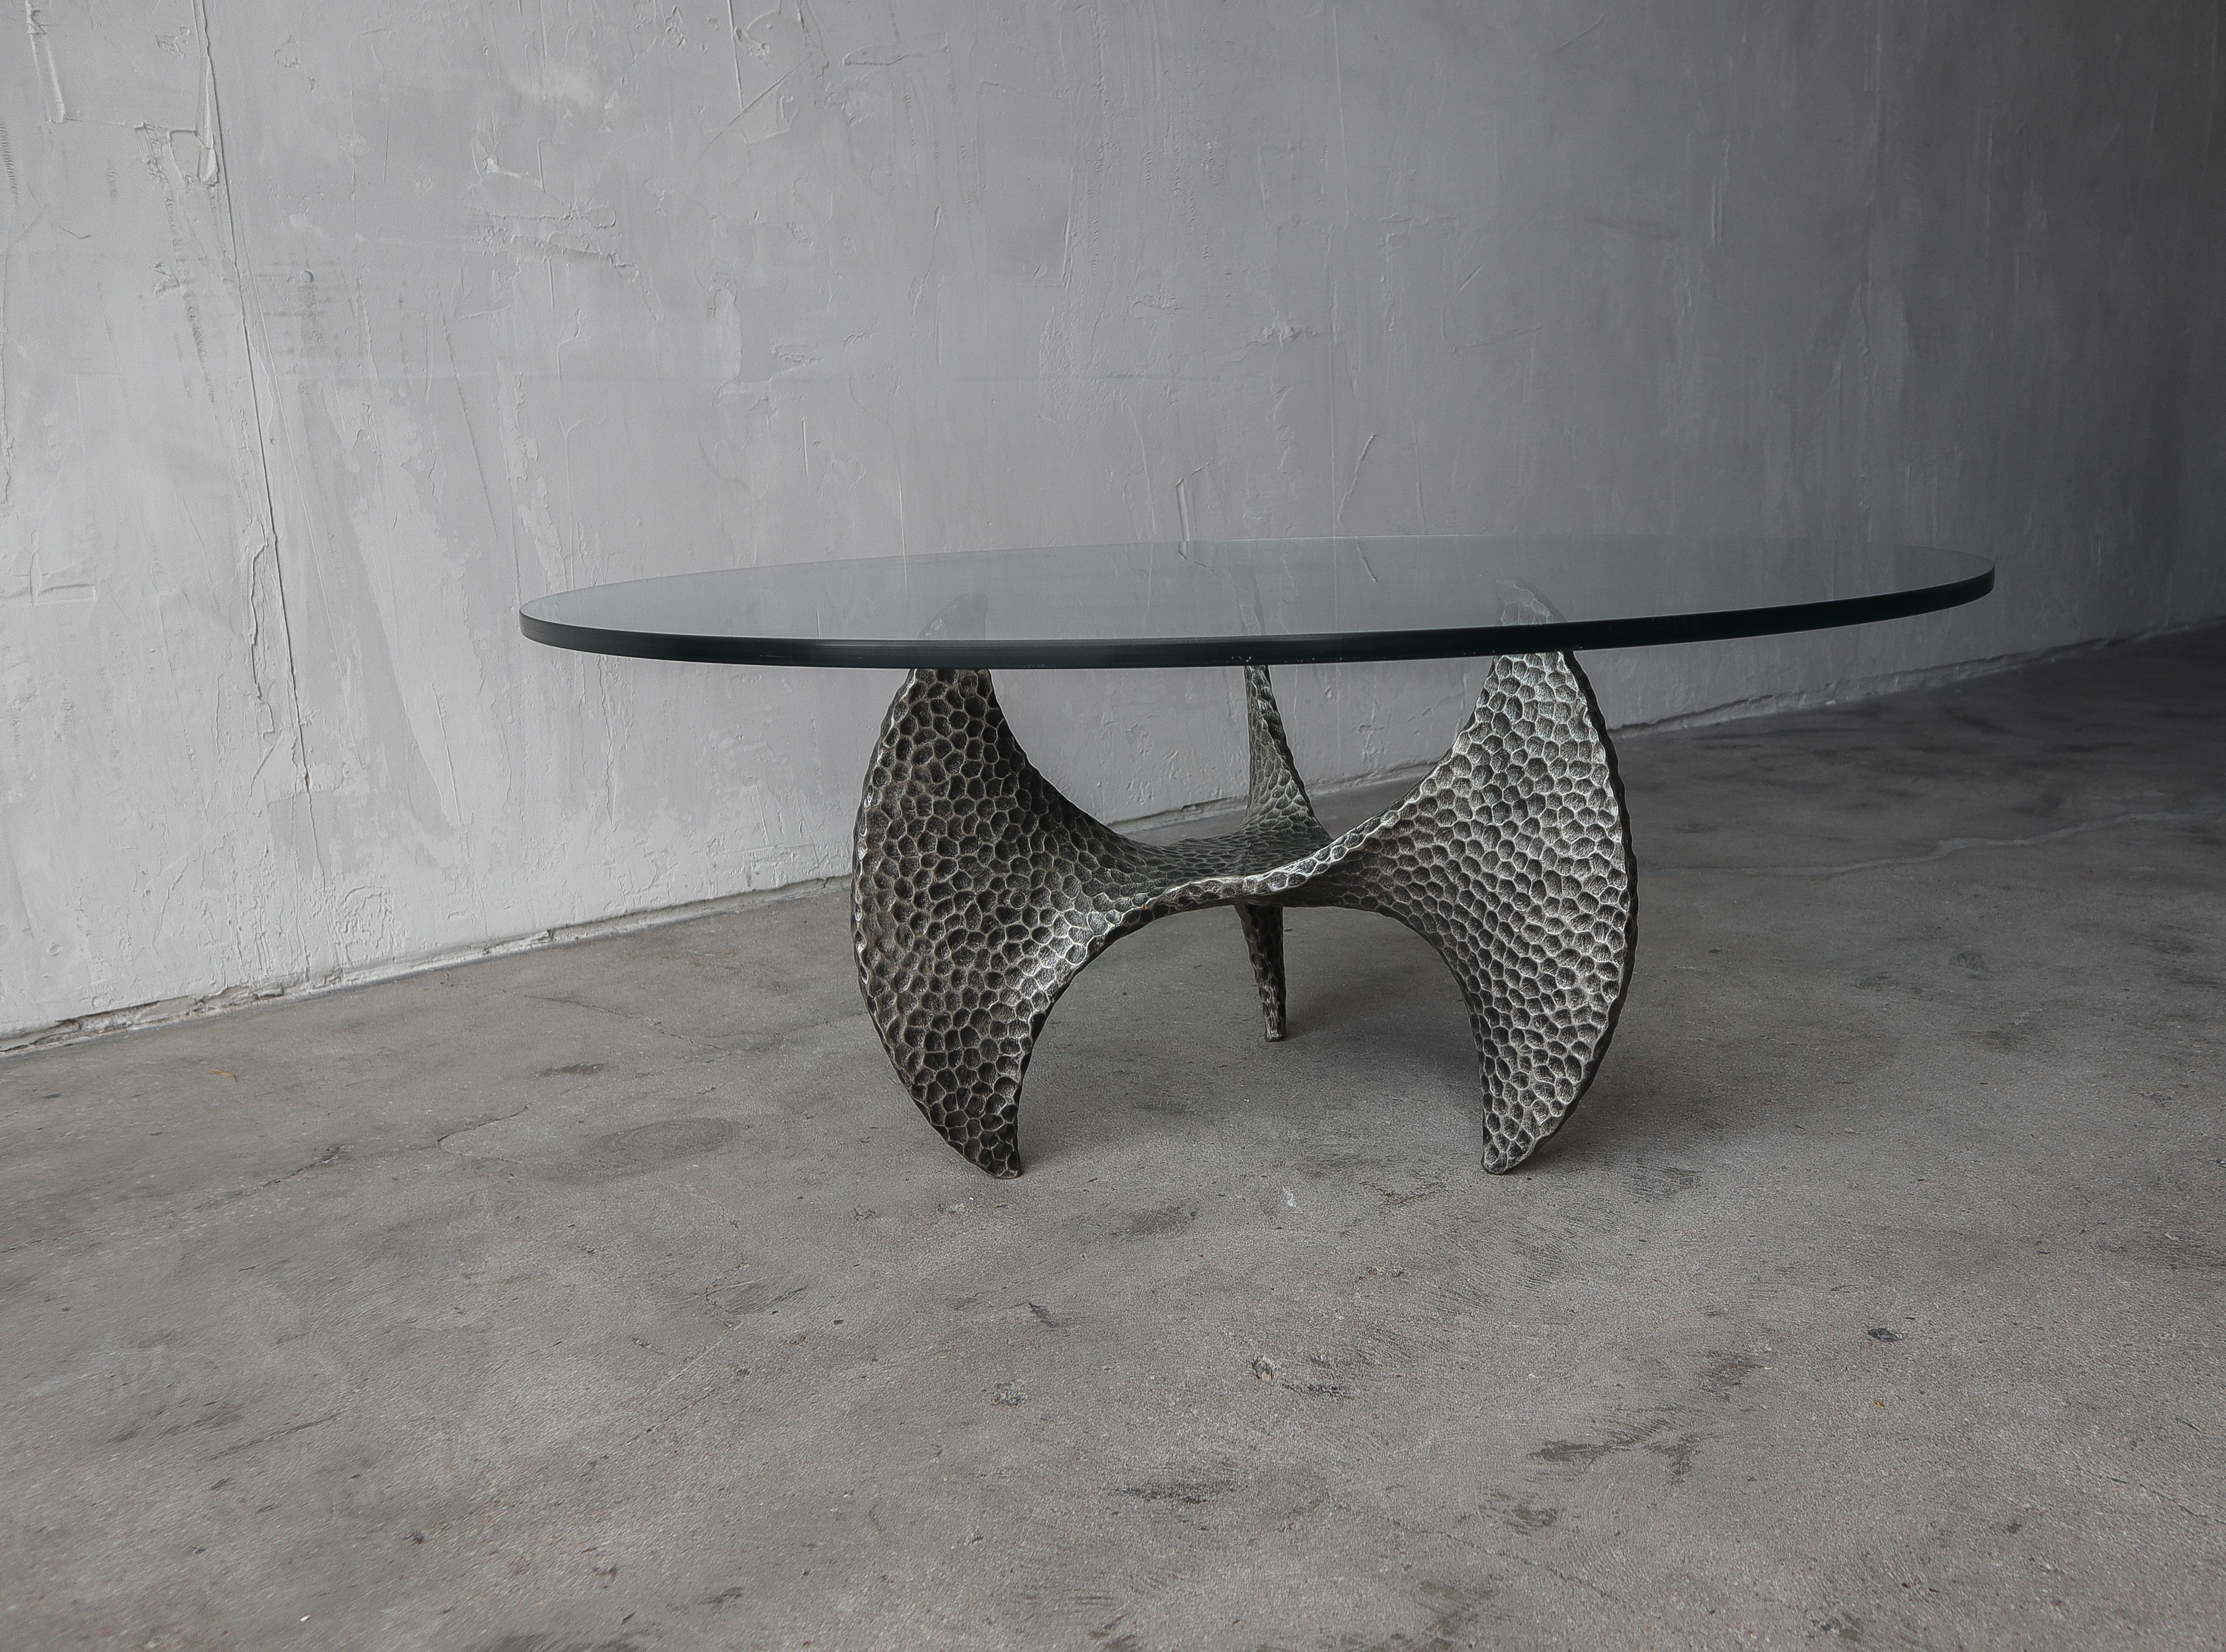 Vintage cast resin propeller side table made to look like hammered metal. A interesting take on the aluminum propeller tables created by Knut Hesterburg. Made in Chicago by the Chicago Statuary Company, stamped and dated 1970

Table is on the